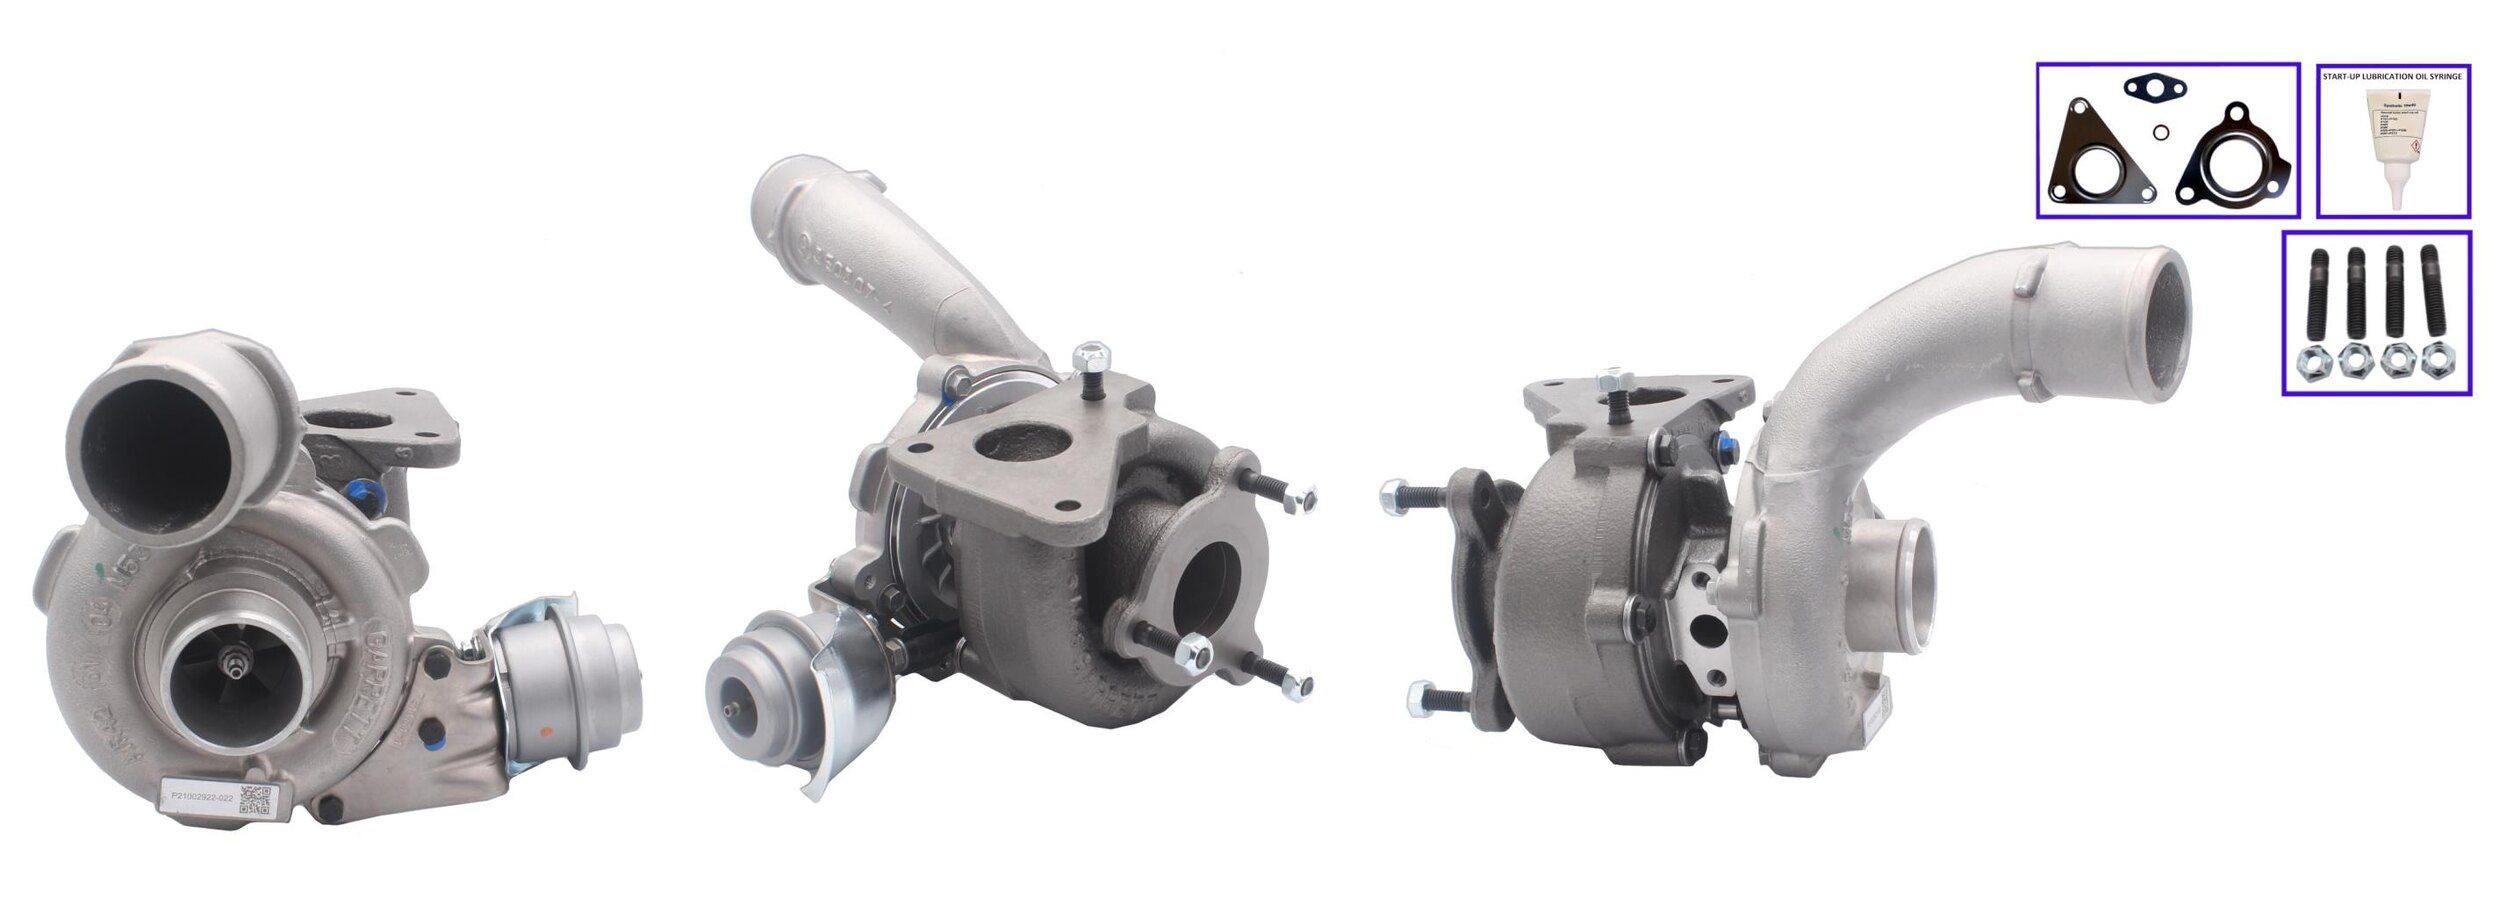 TURBO MOTOR PA7086392 Turbocharger Exhaust Turbocharger, Pneumatically controlled actuator, with gaskets/seals